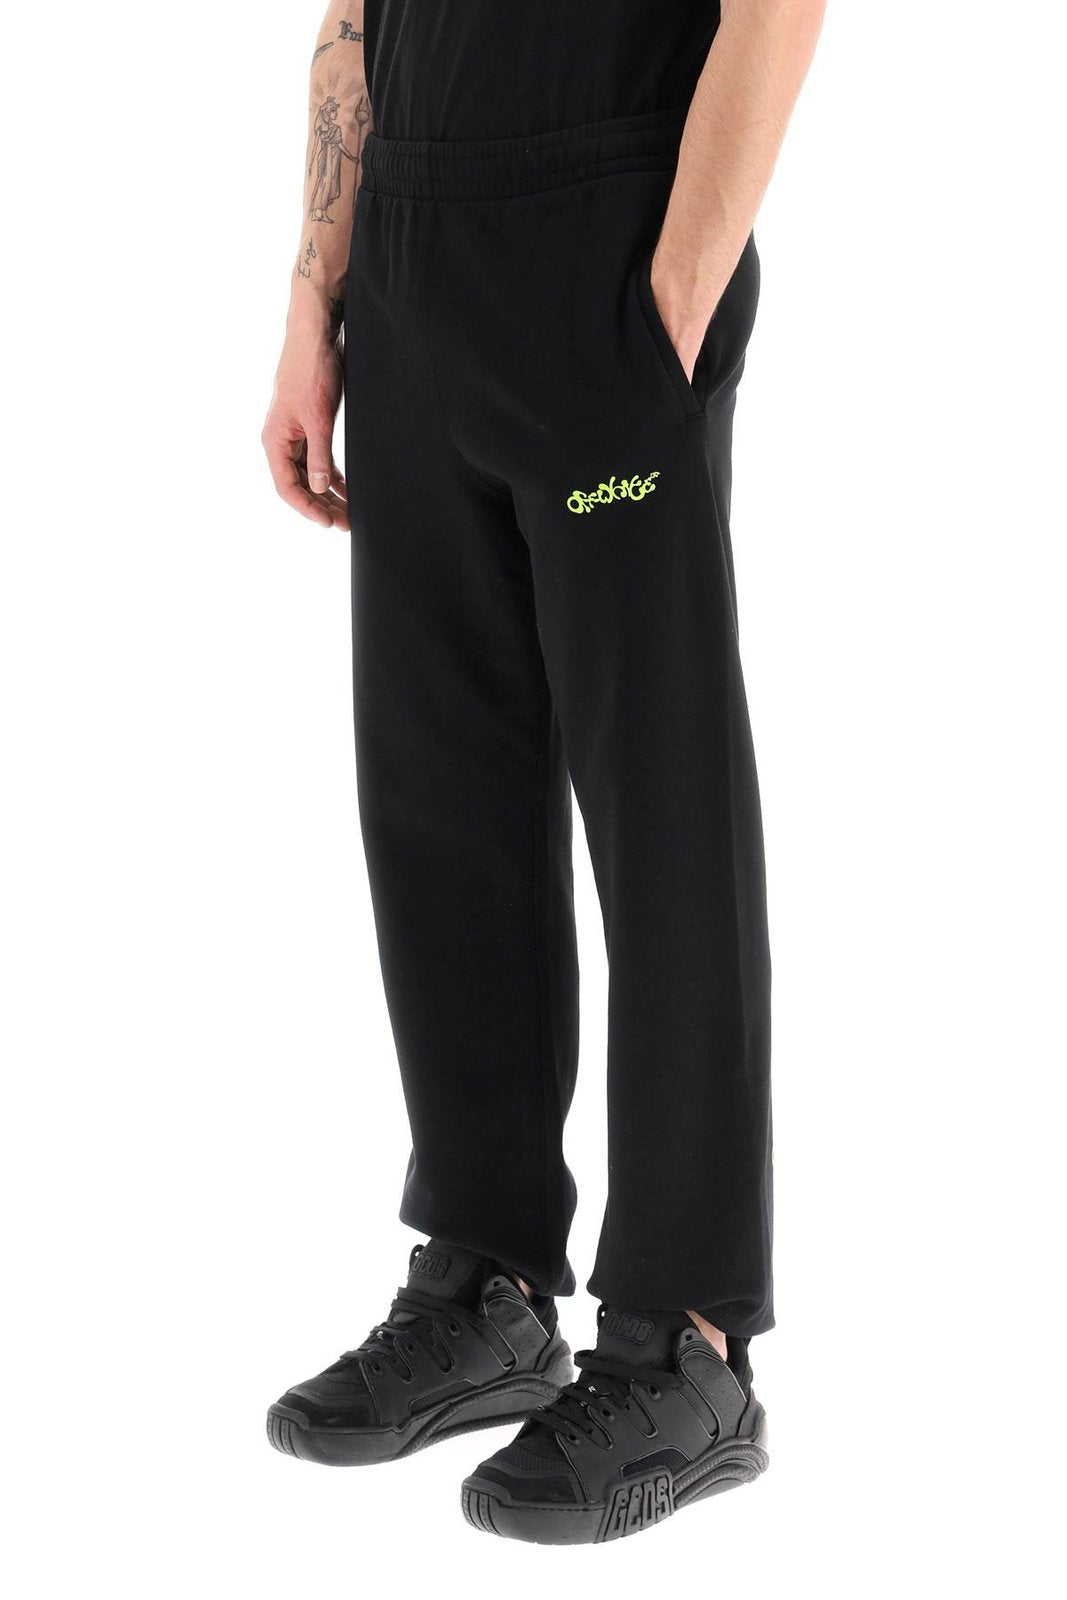 Off-White Arrows Logo Printed Track Pants